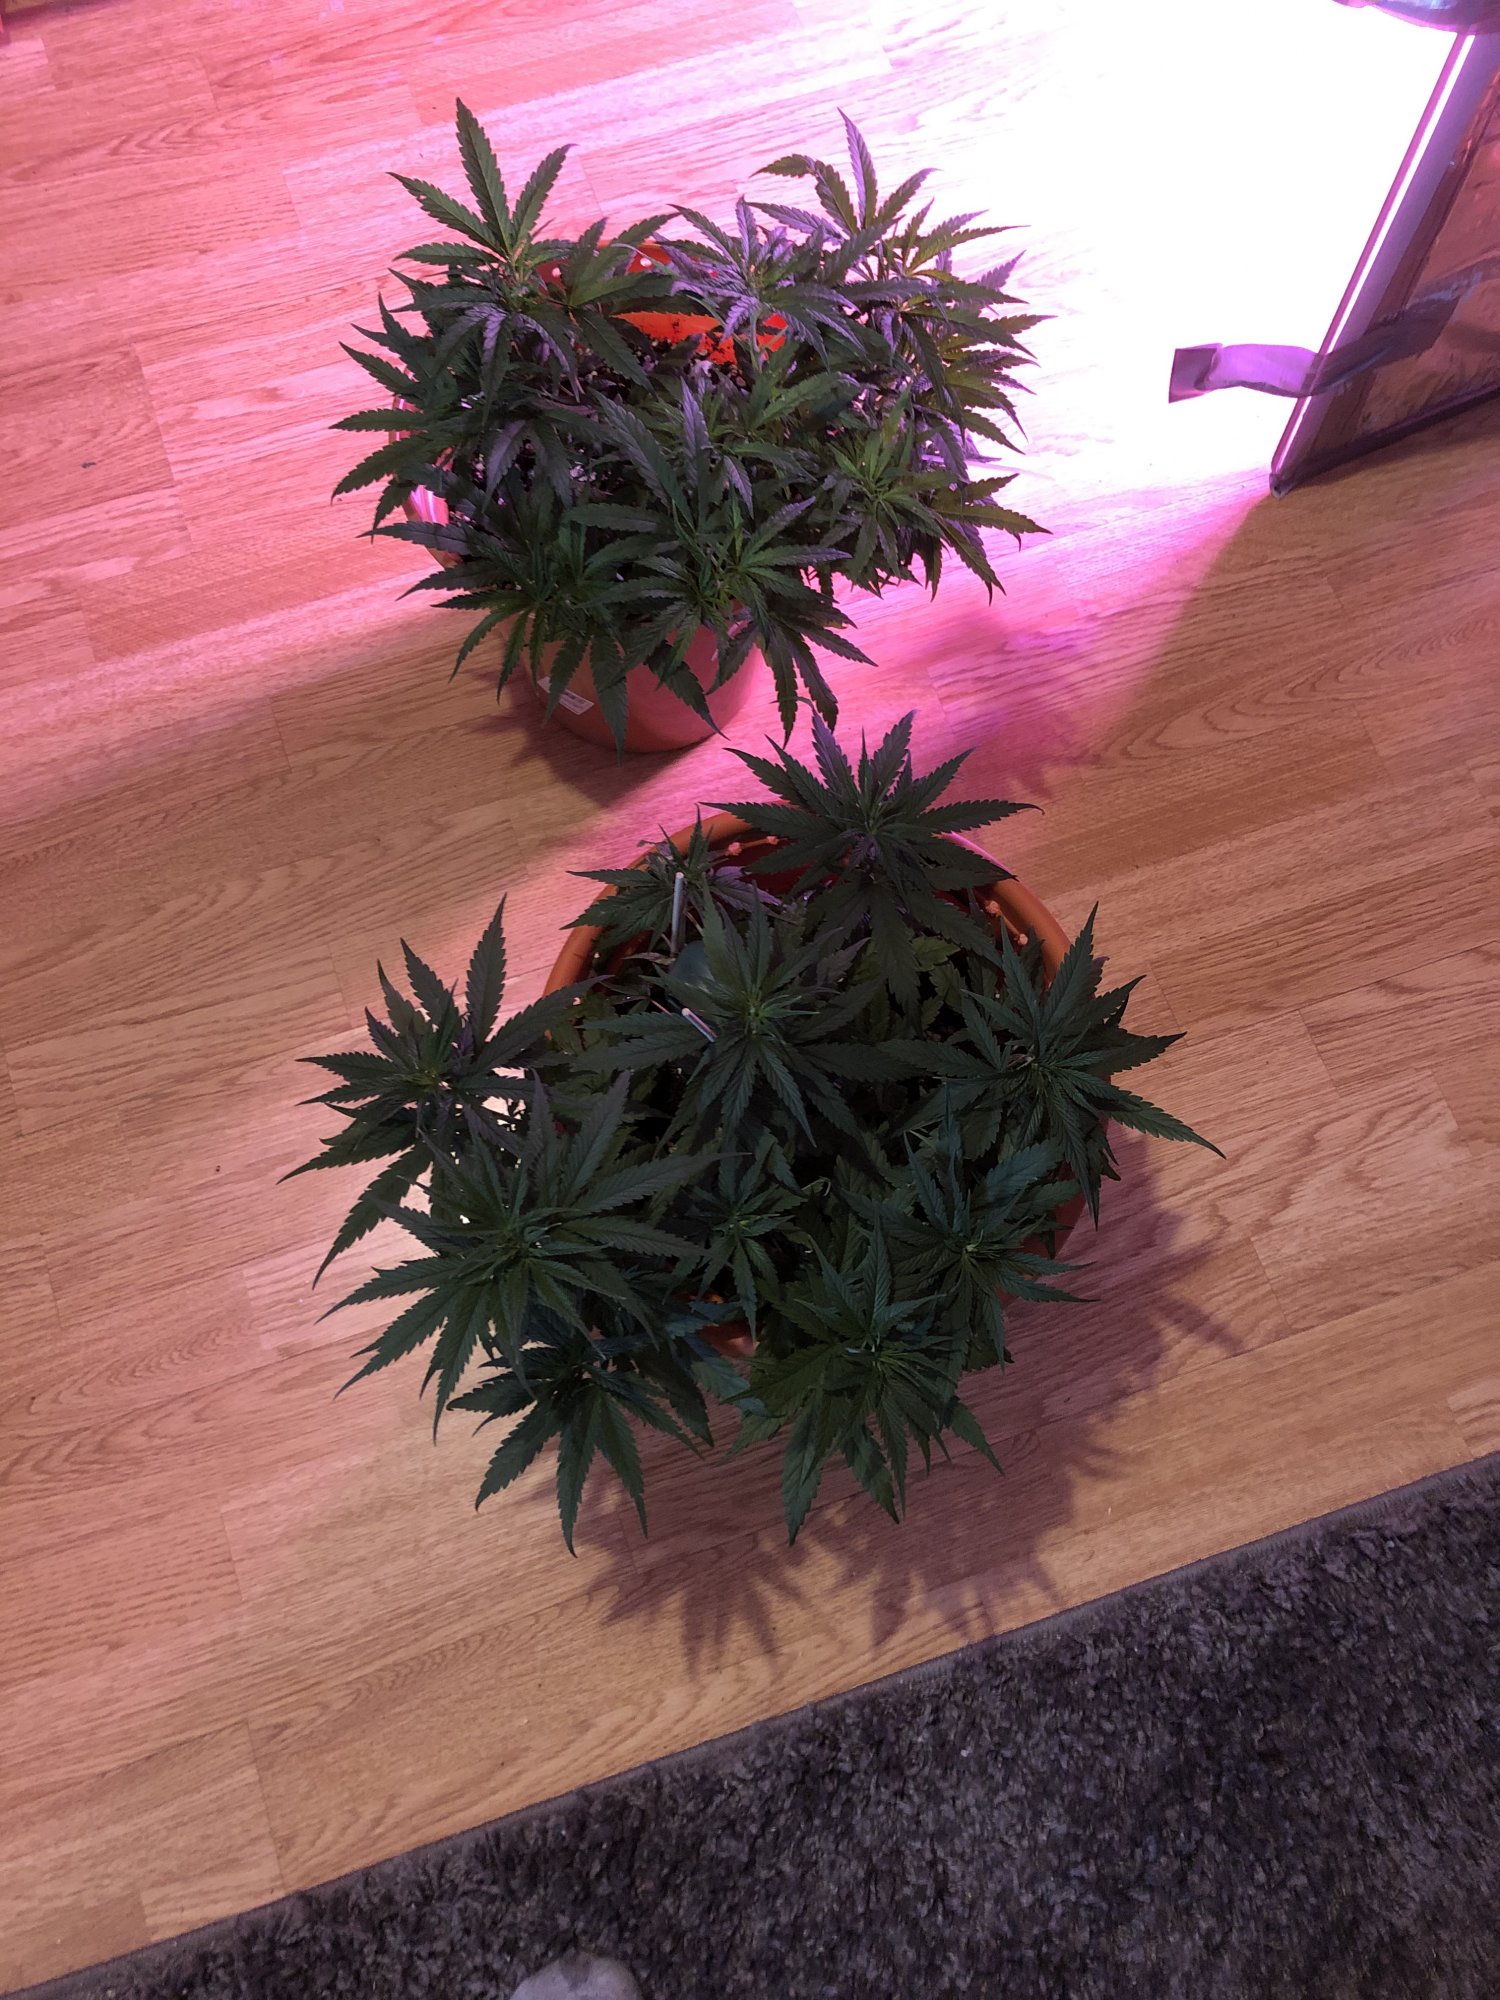 My first grow how am i doing